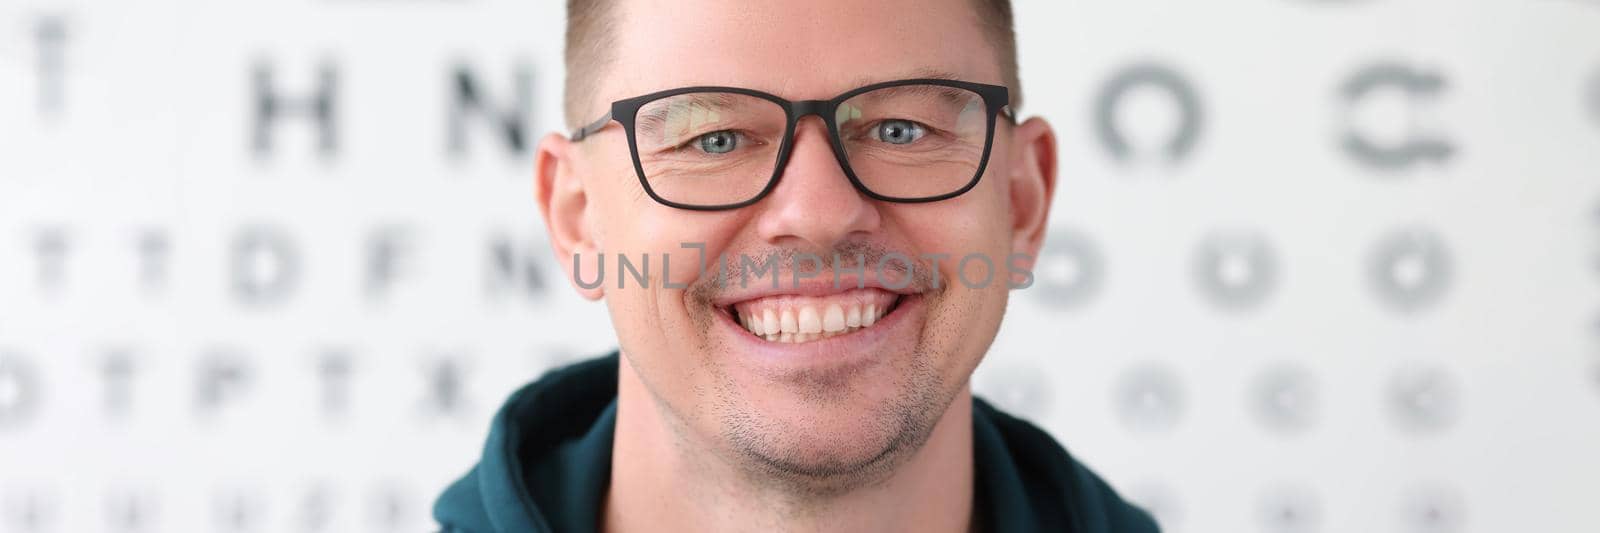 Portrait of smiling man with glasses on background of table for vision test. Correction of myopia selection of glasses concept